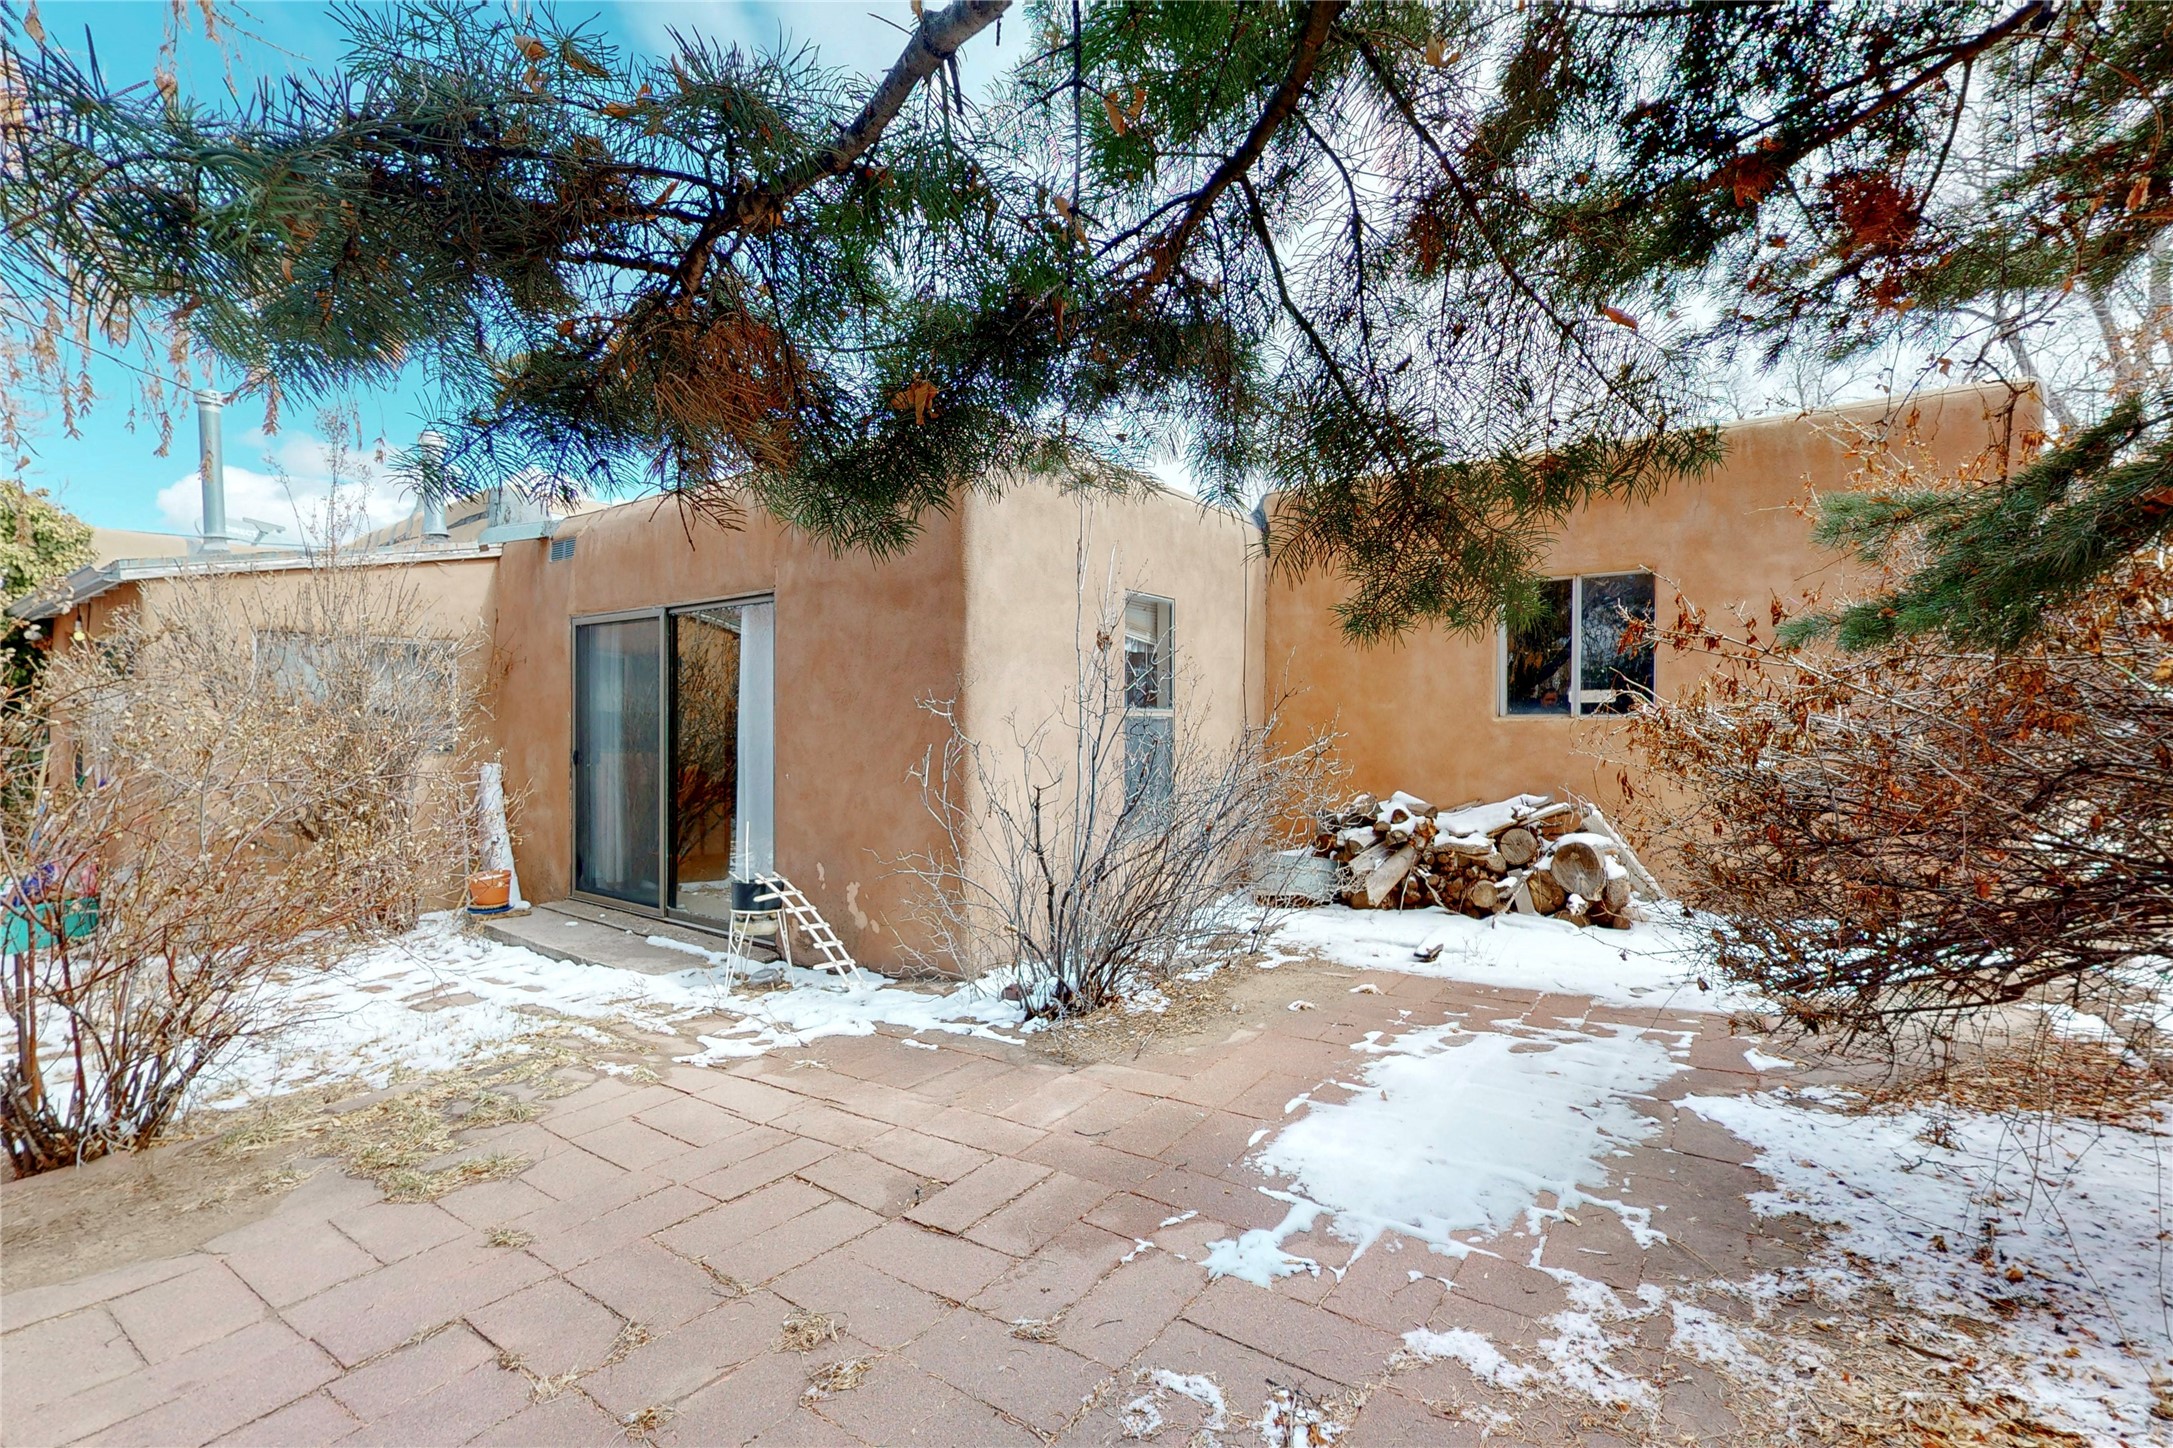 913 1/2 Acequia Madre, Santa Fe, New Mexico 87505, 2 Bedrooms Bedrooms, ,2 BathroomsBathrooms,Residential,For Sale,913 1/2 Acequia Madre,202335034